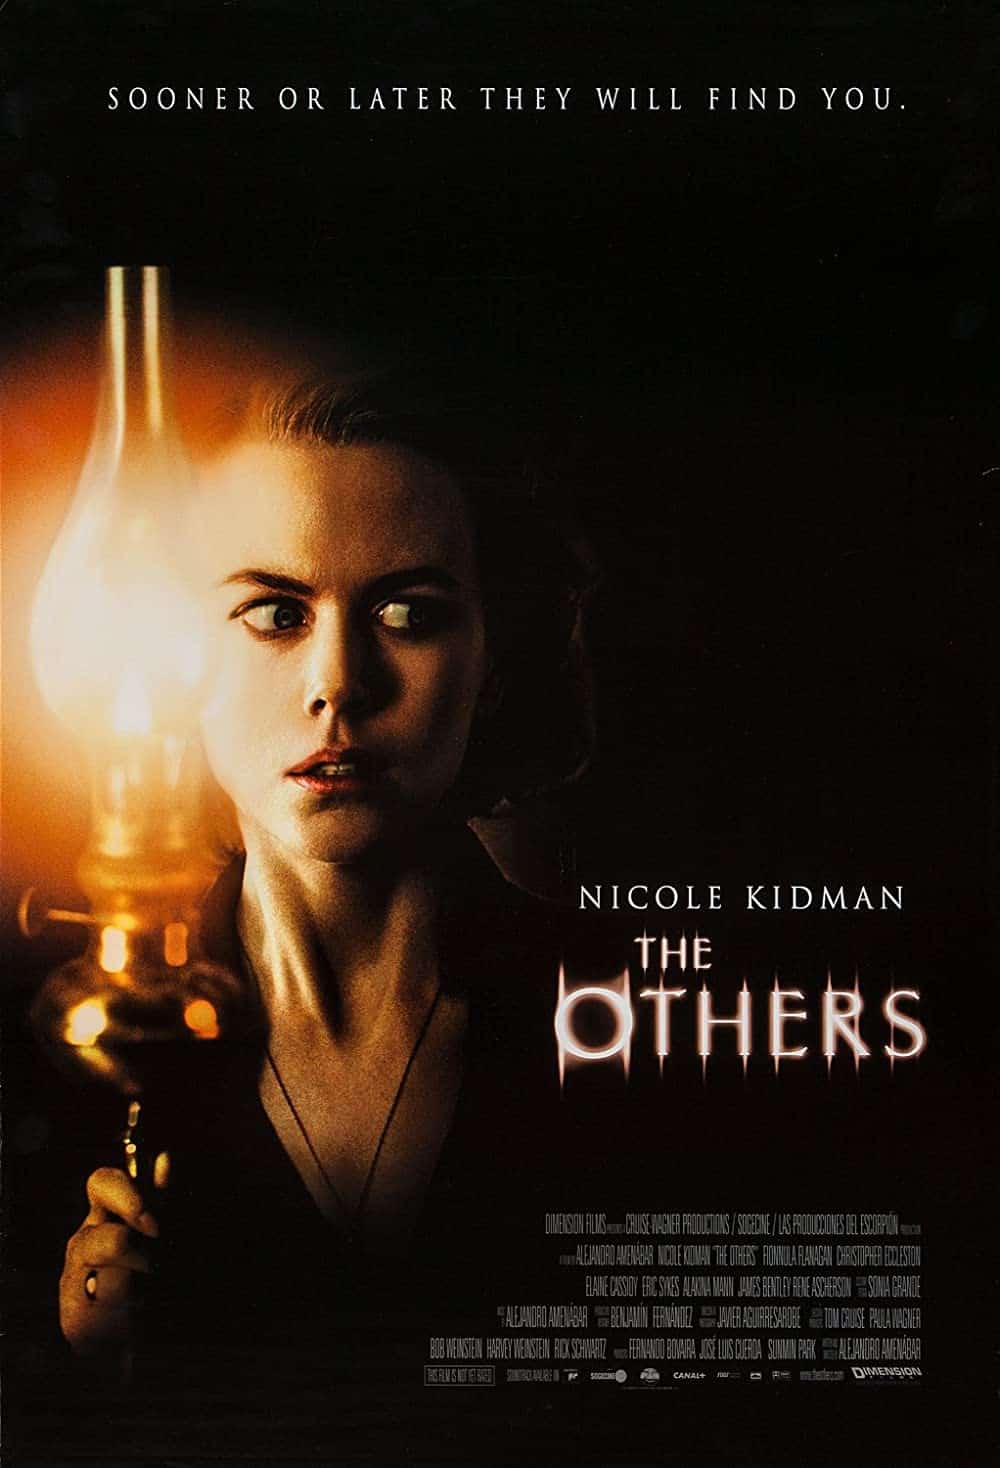 The Others (2001) Best Nicole Kidman Movies (Ranked)